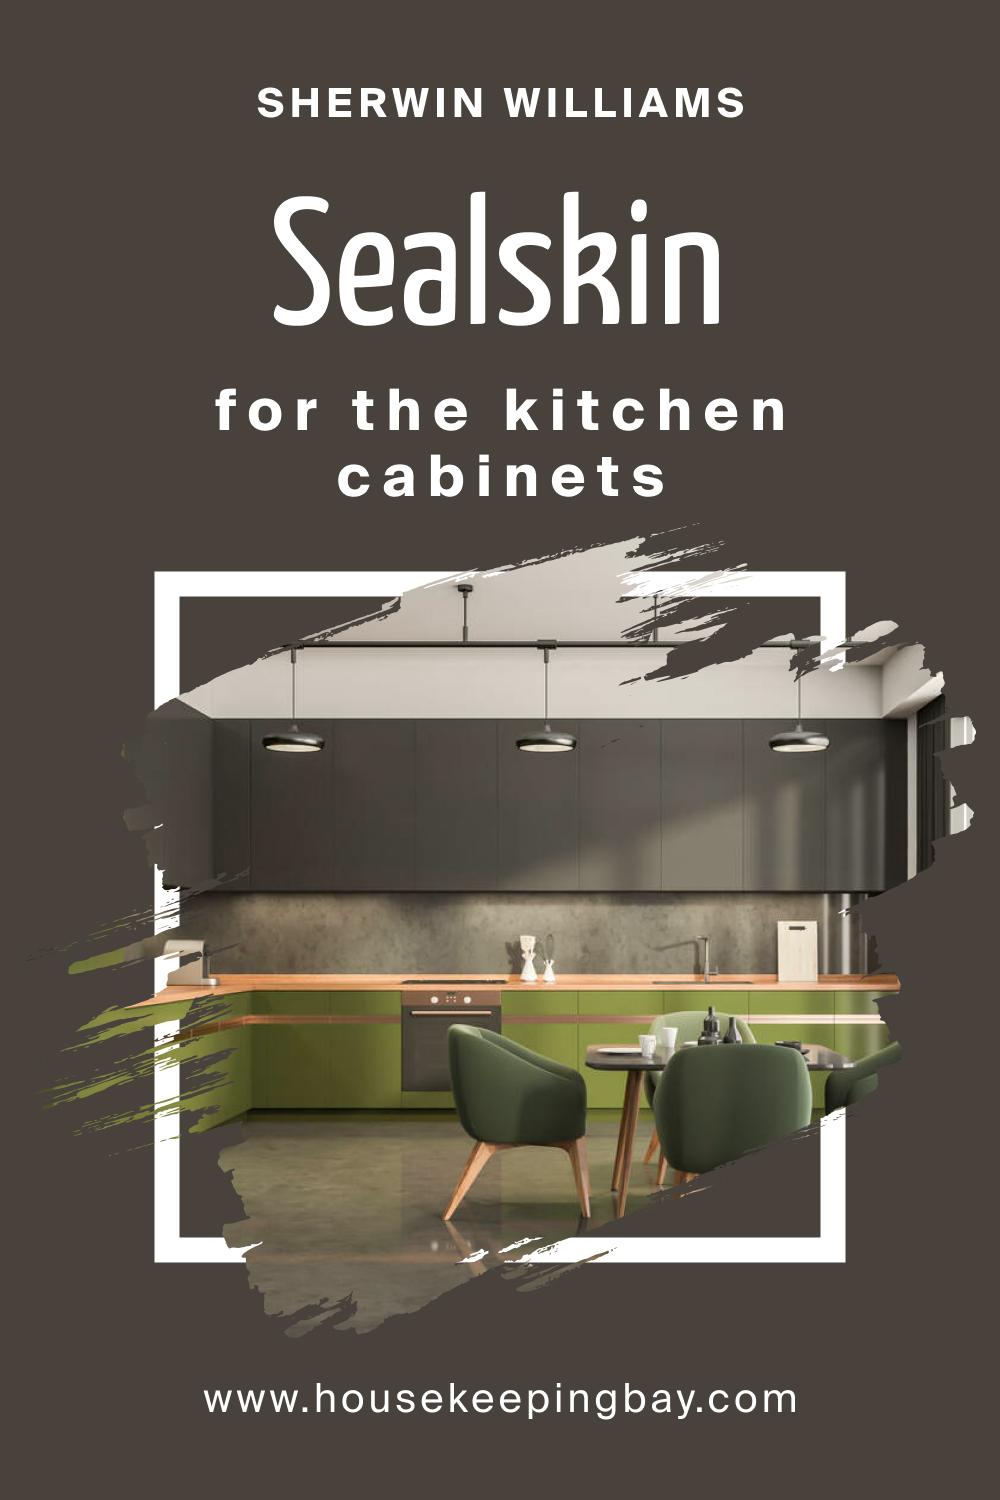 Sherwin Williams. SW 7675 Sealskin For the Kitchen Cabinets